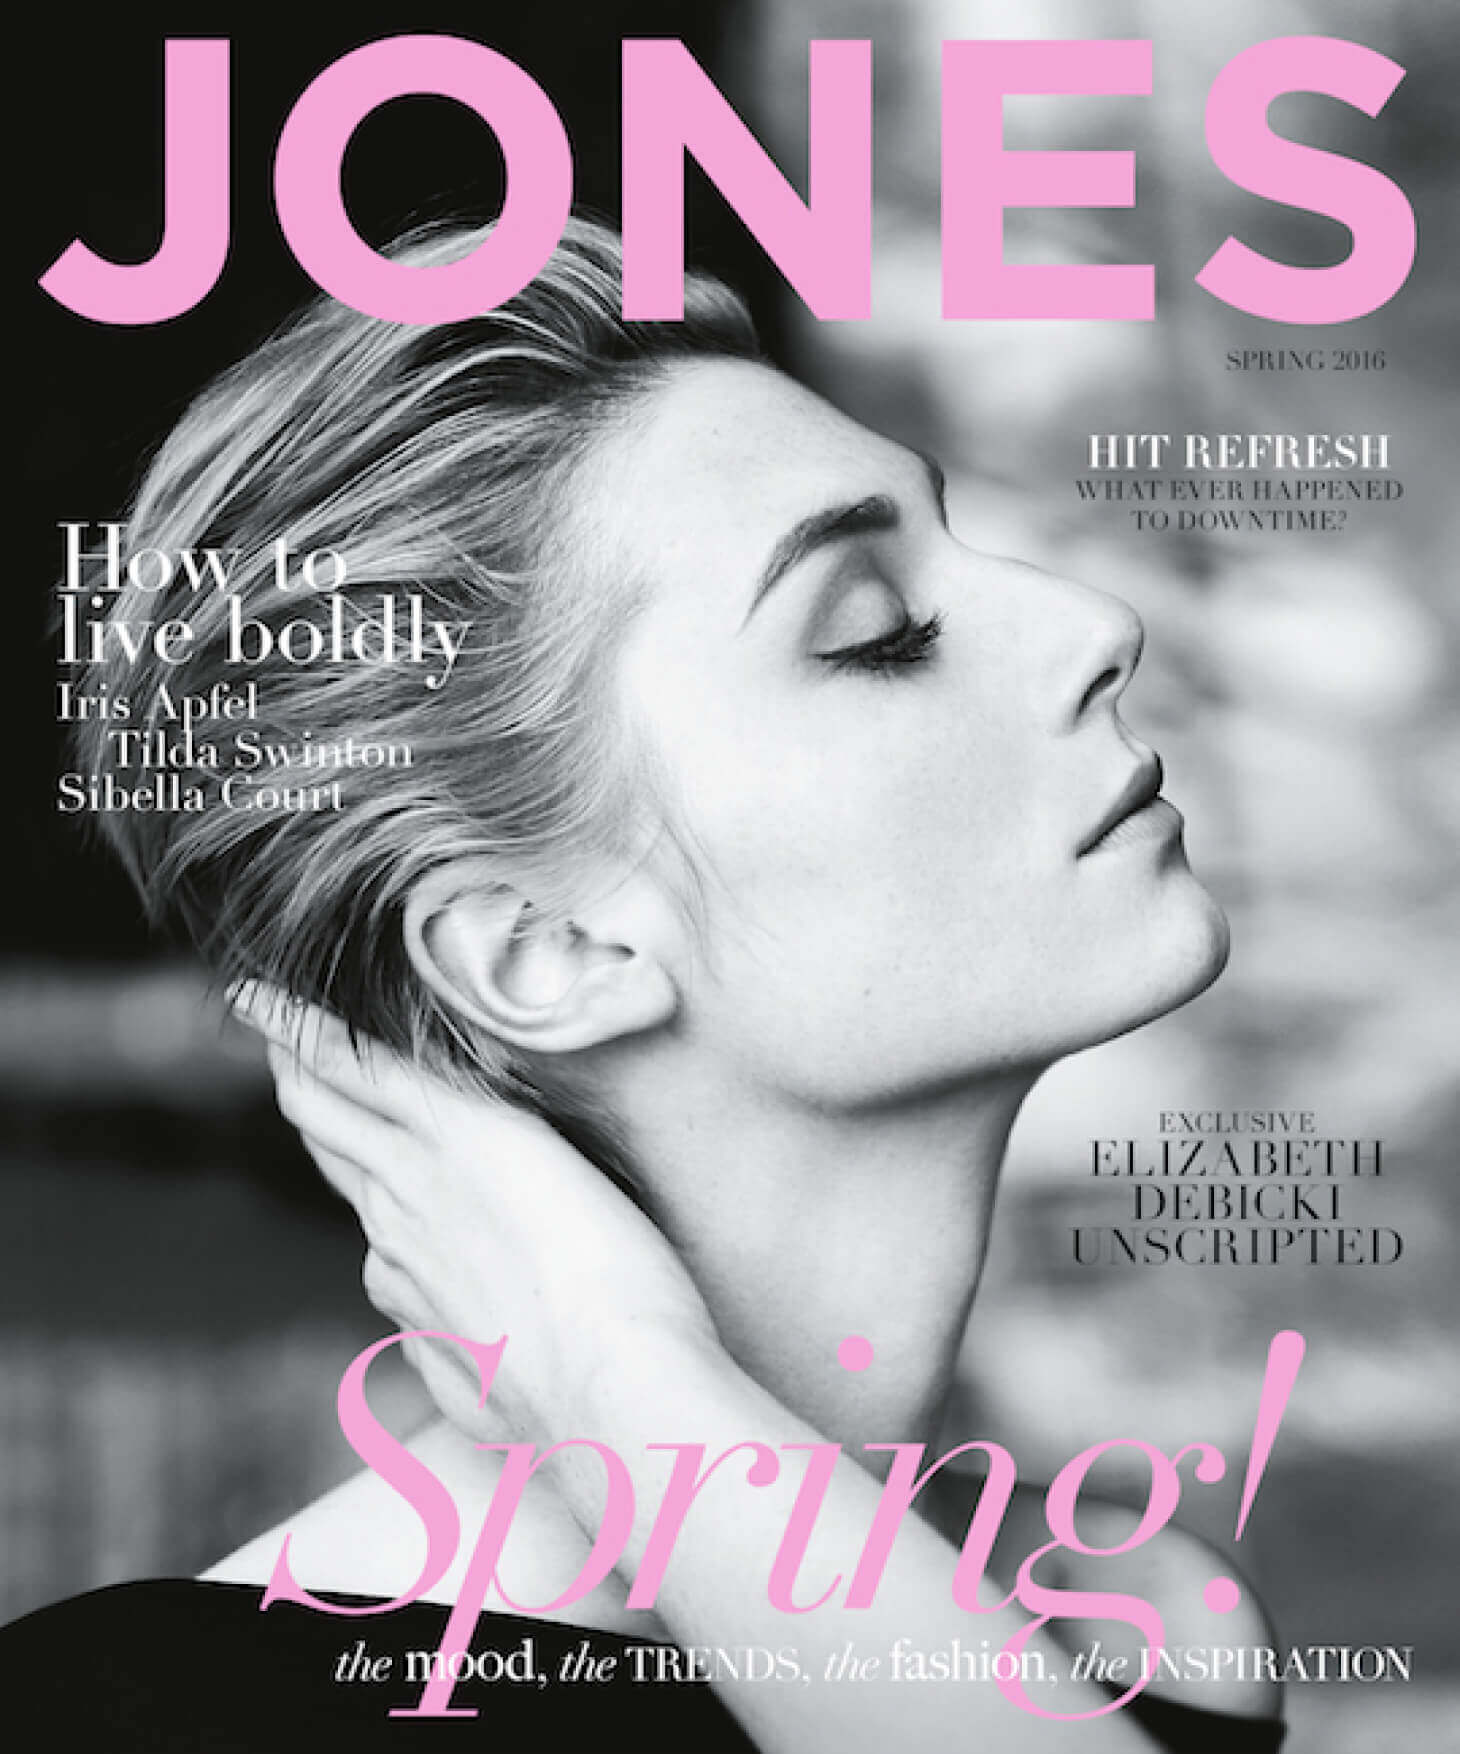 David Jones opens up for high end brand advertisers in-store and